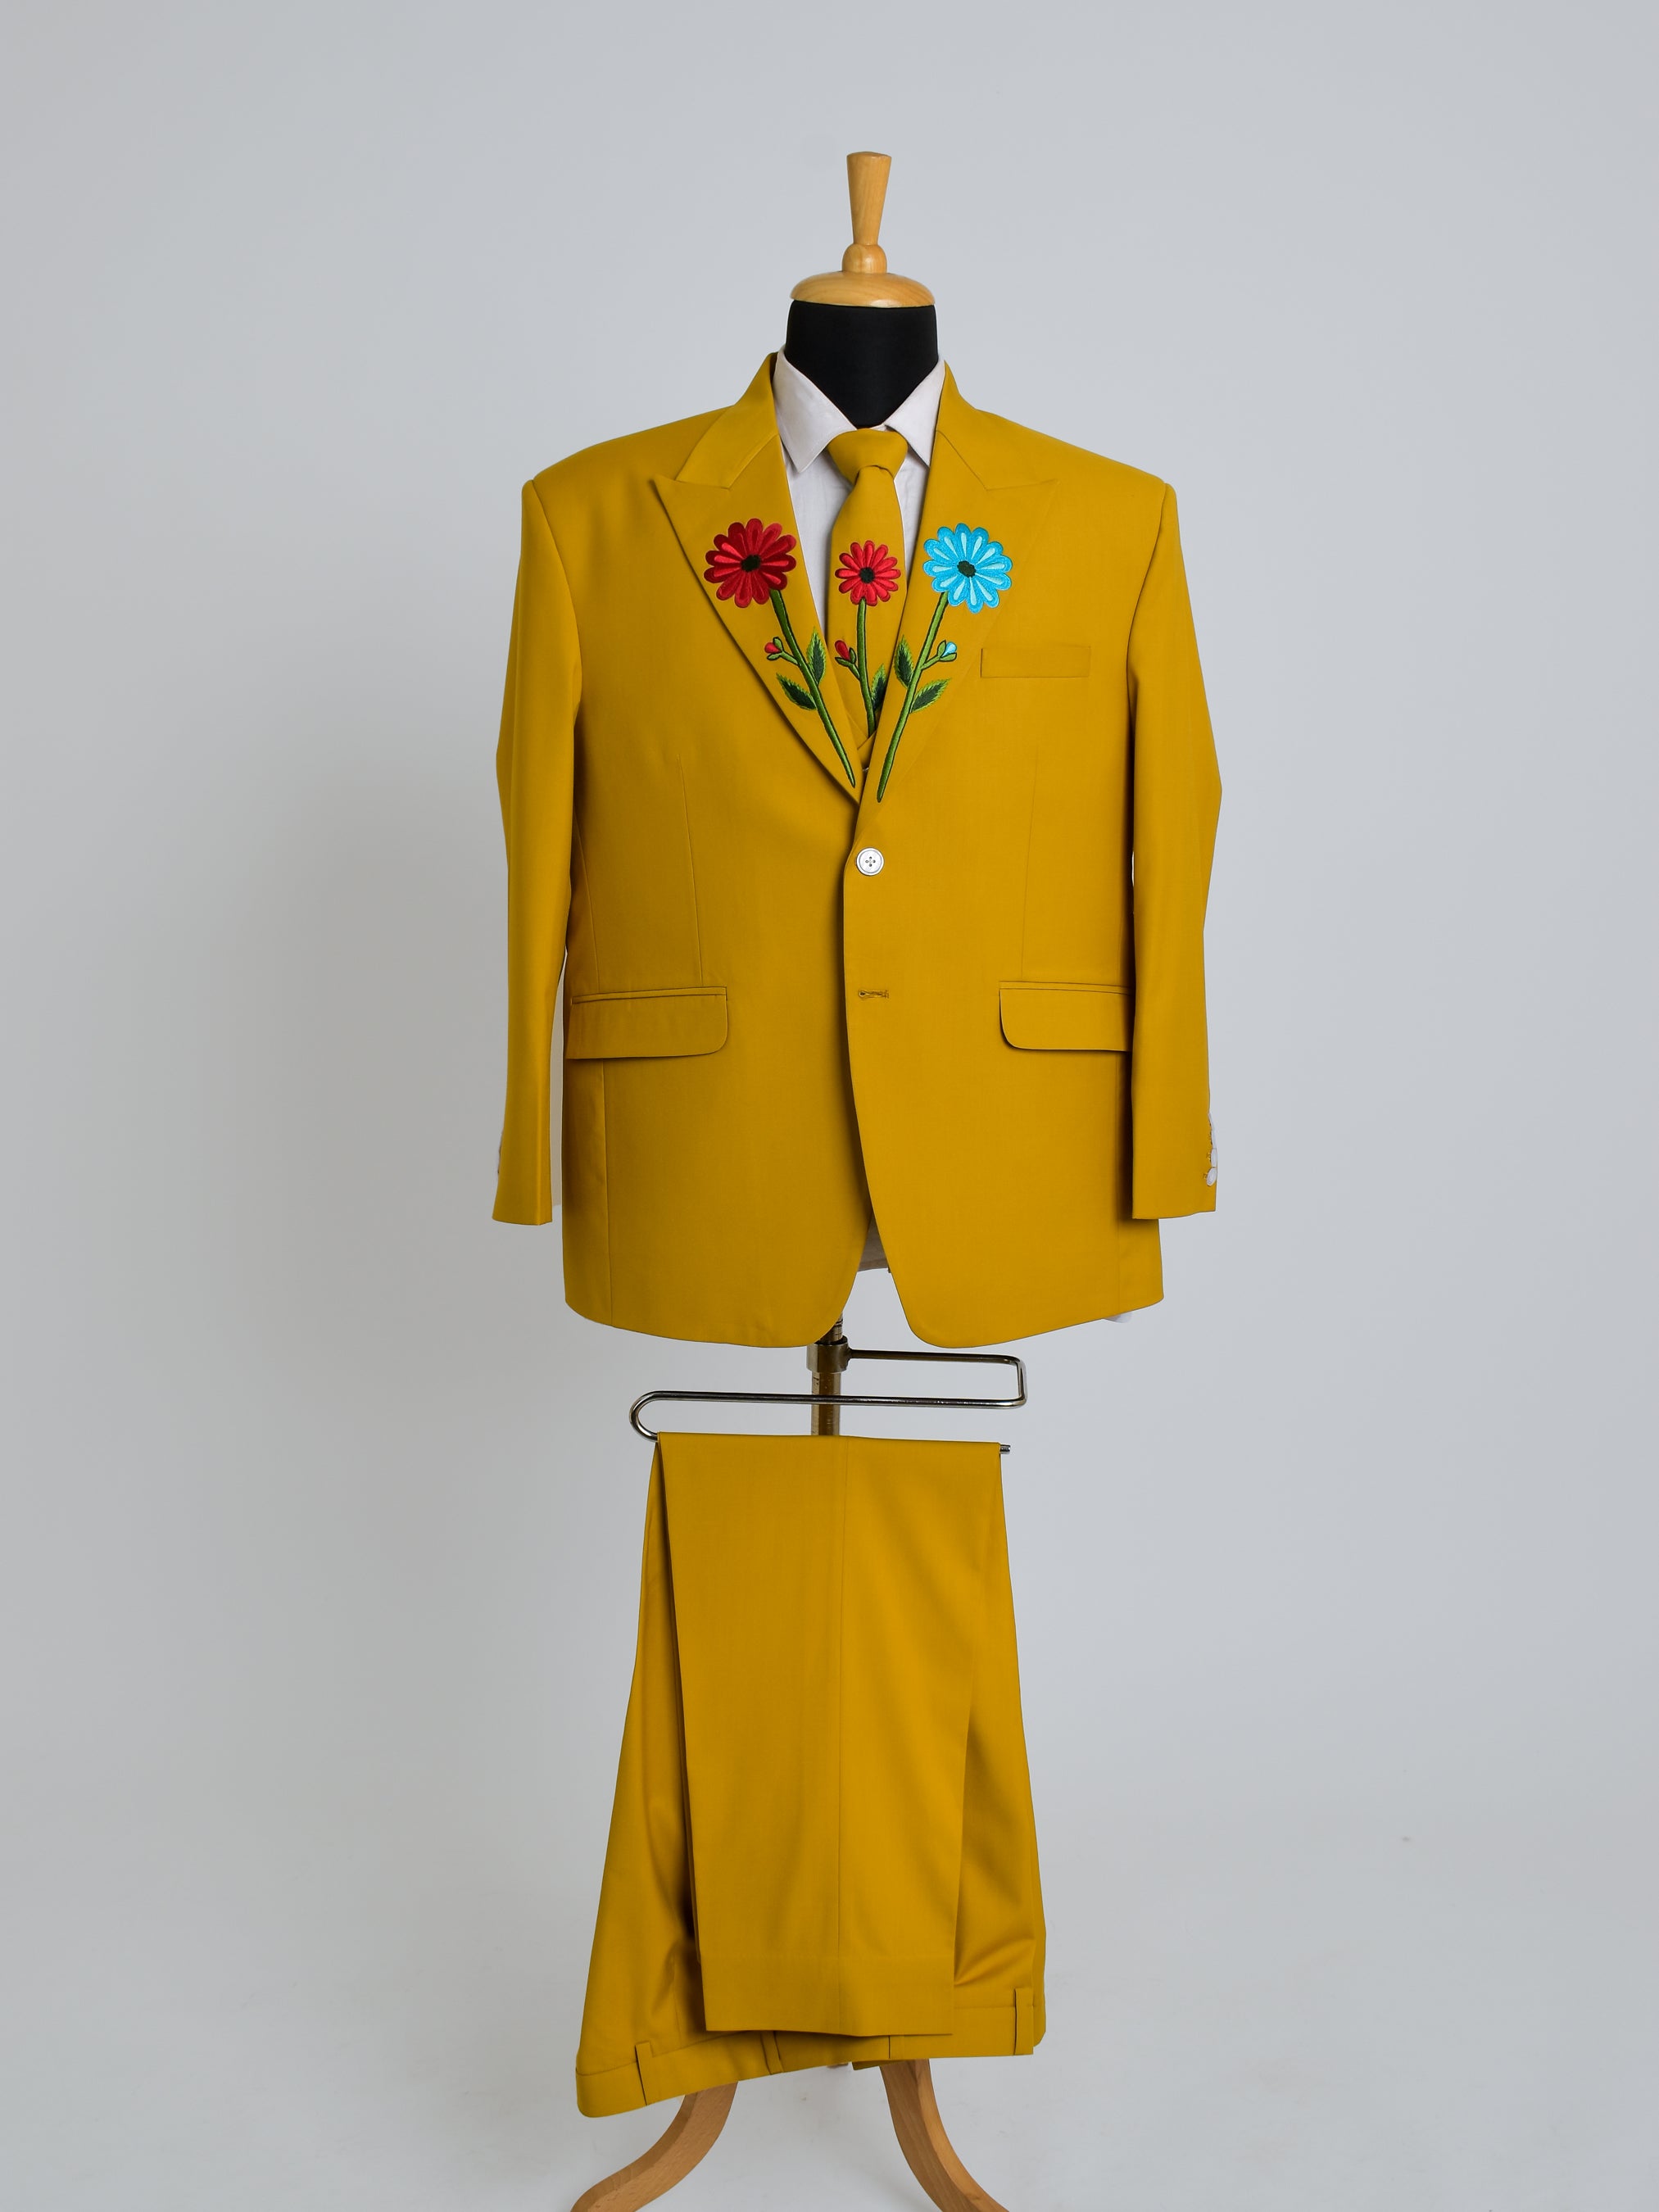 Ornate Lapel Country Western Suit